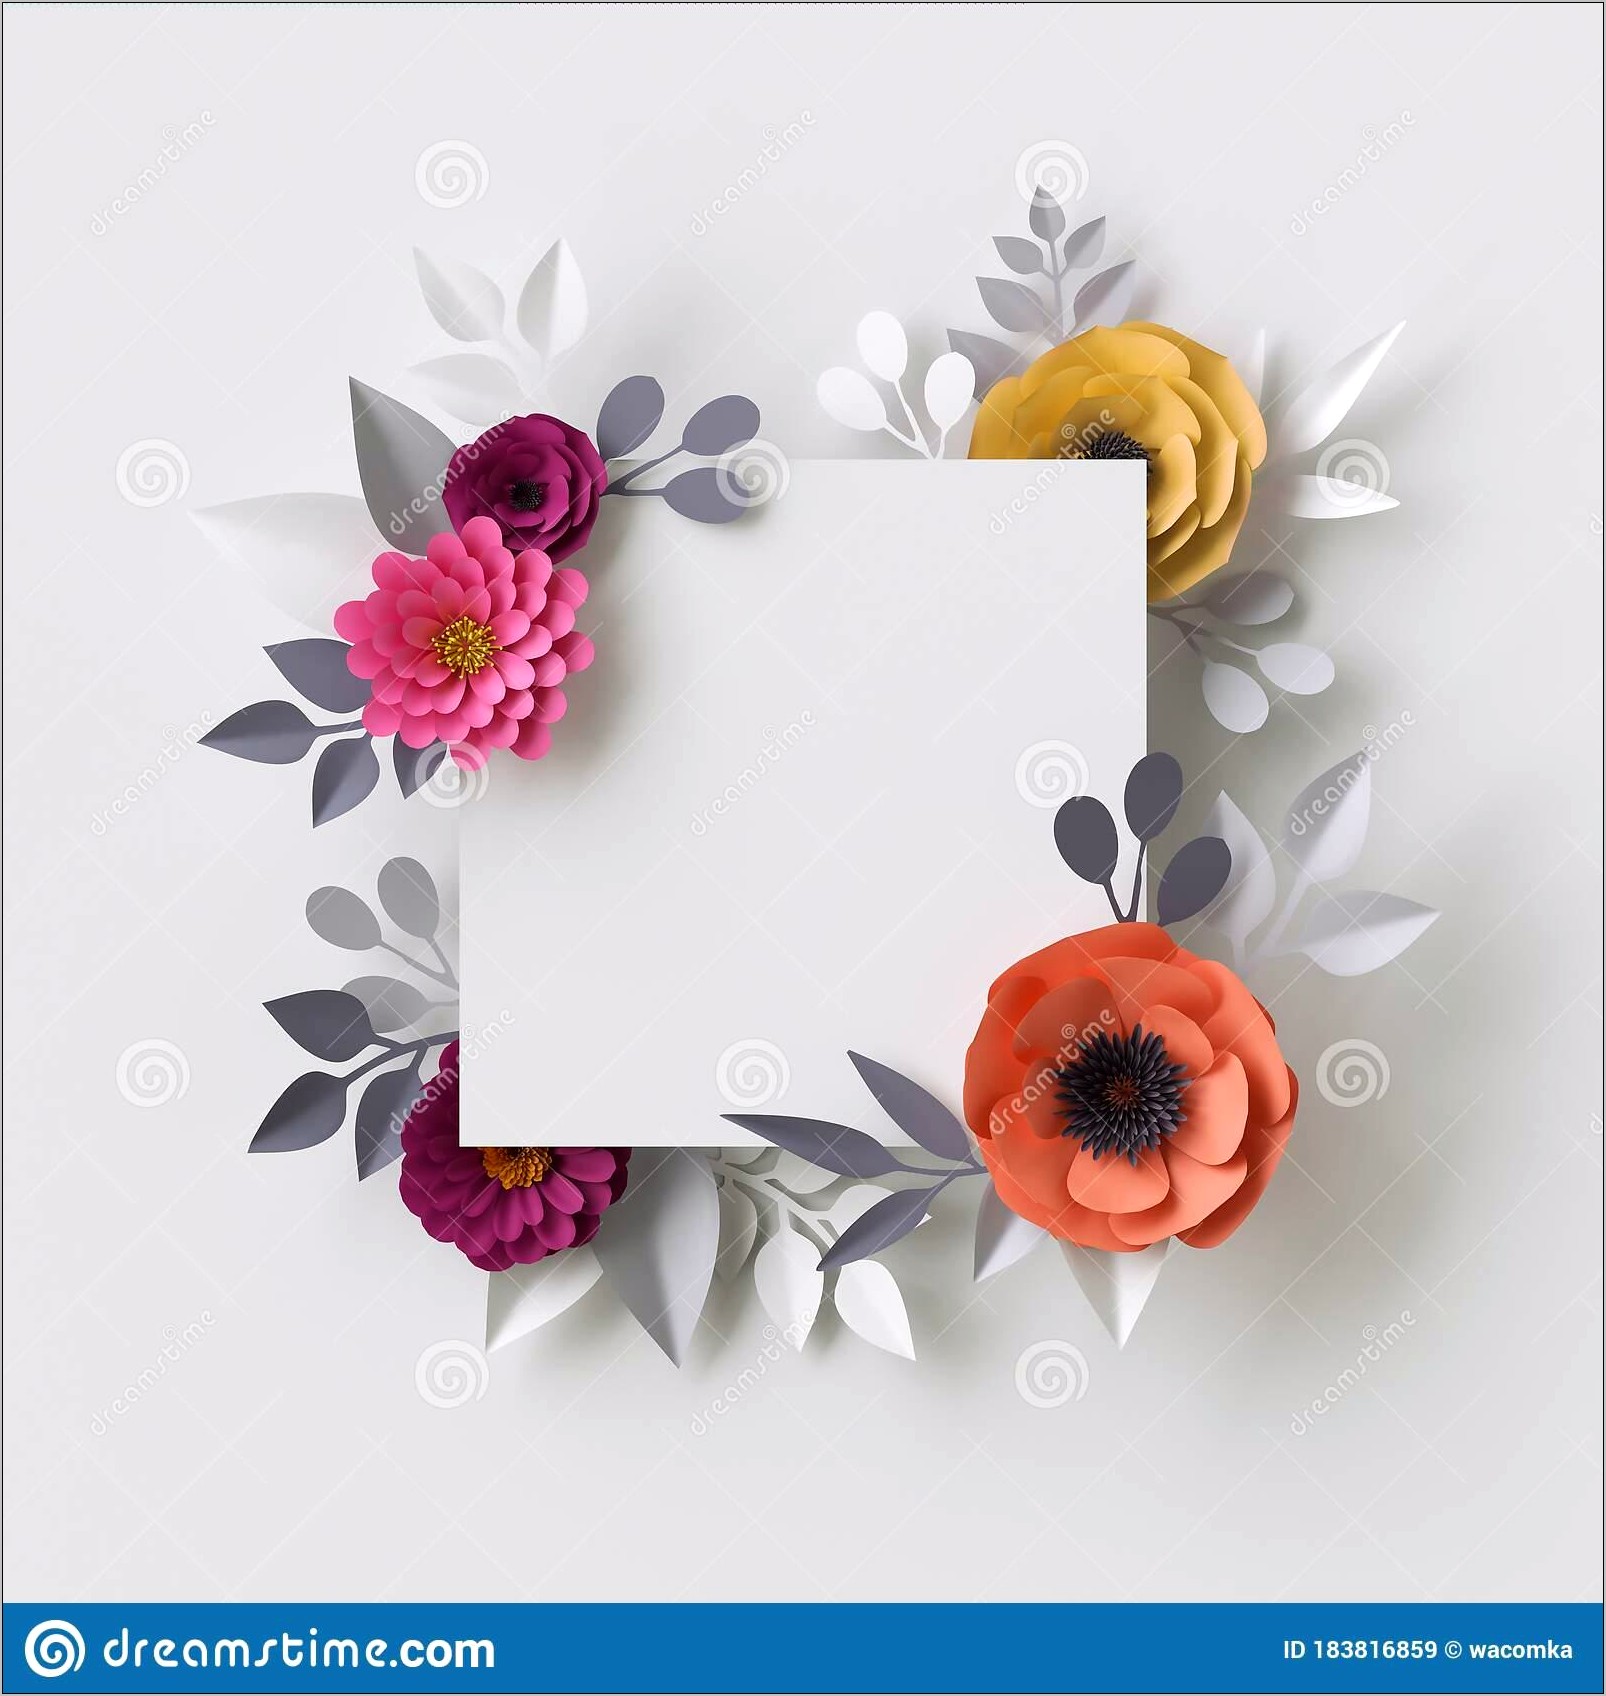 blank-greeting-card-template-free-download-resume-gallery